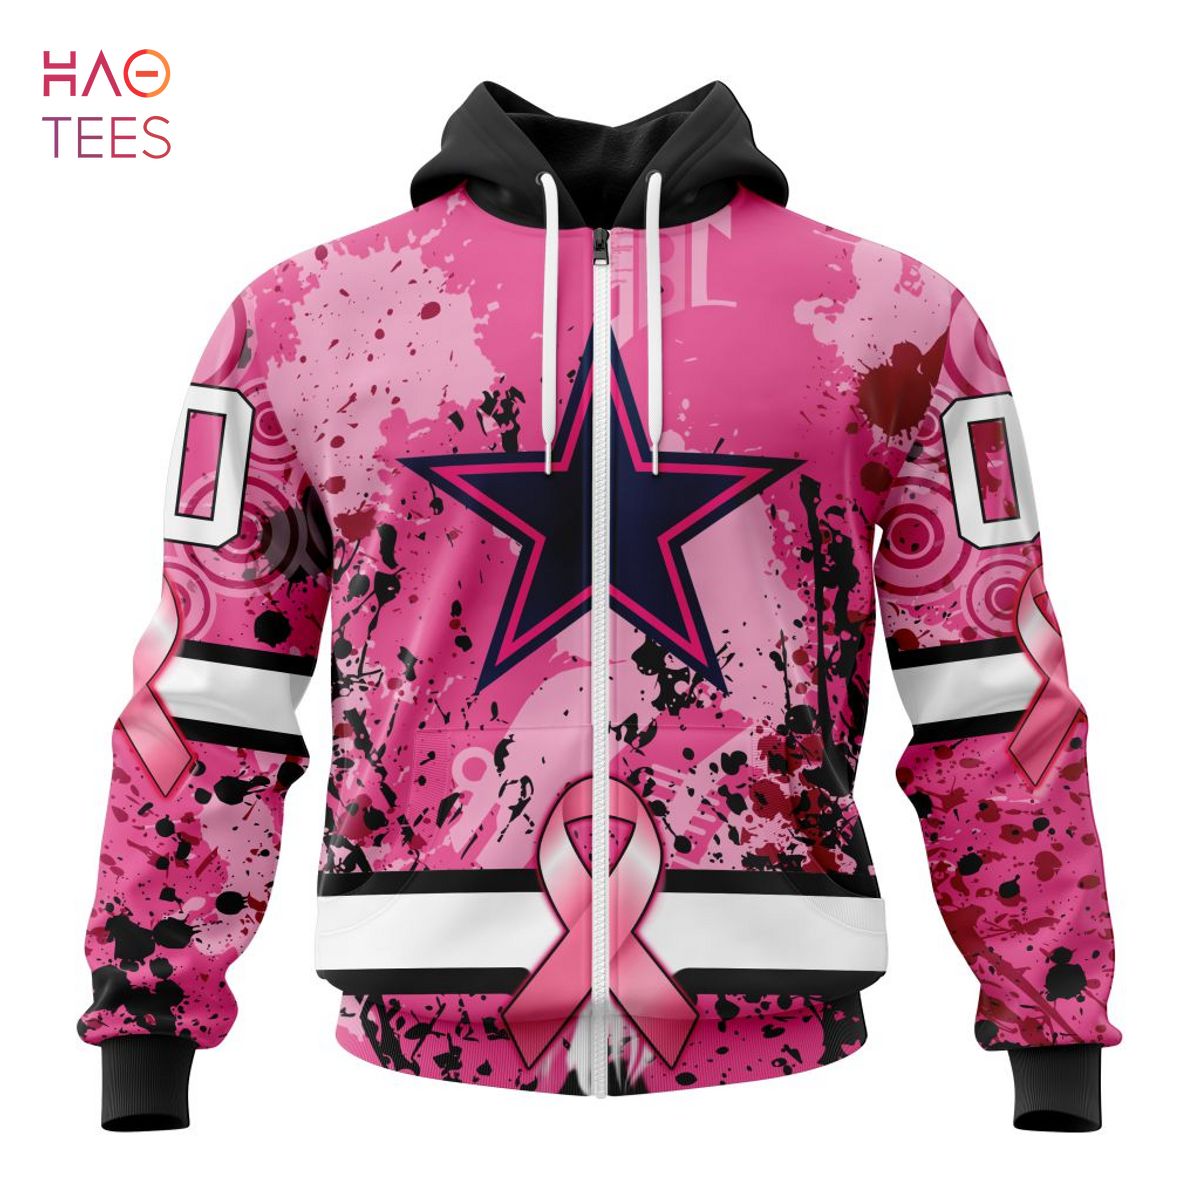 BEST NFL Dallas Cowboysls, Specialized Design I Pink I Can! IN OCTOBER WE WEAR PINK BREAST CANCER 3D Hoodie